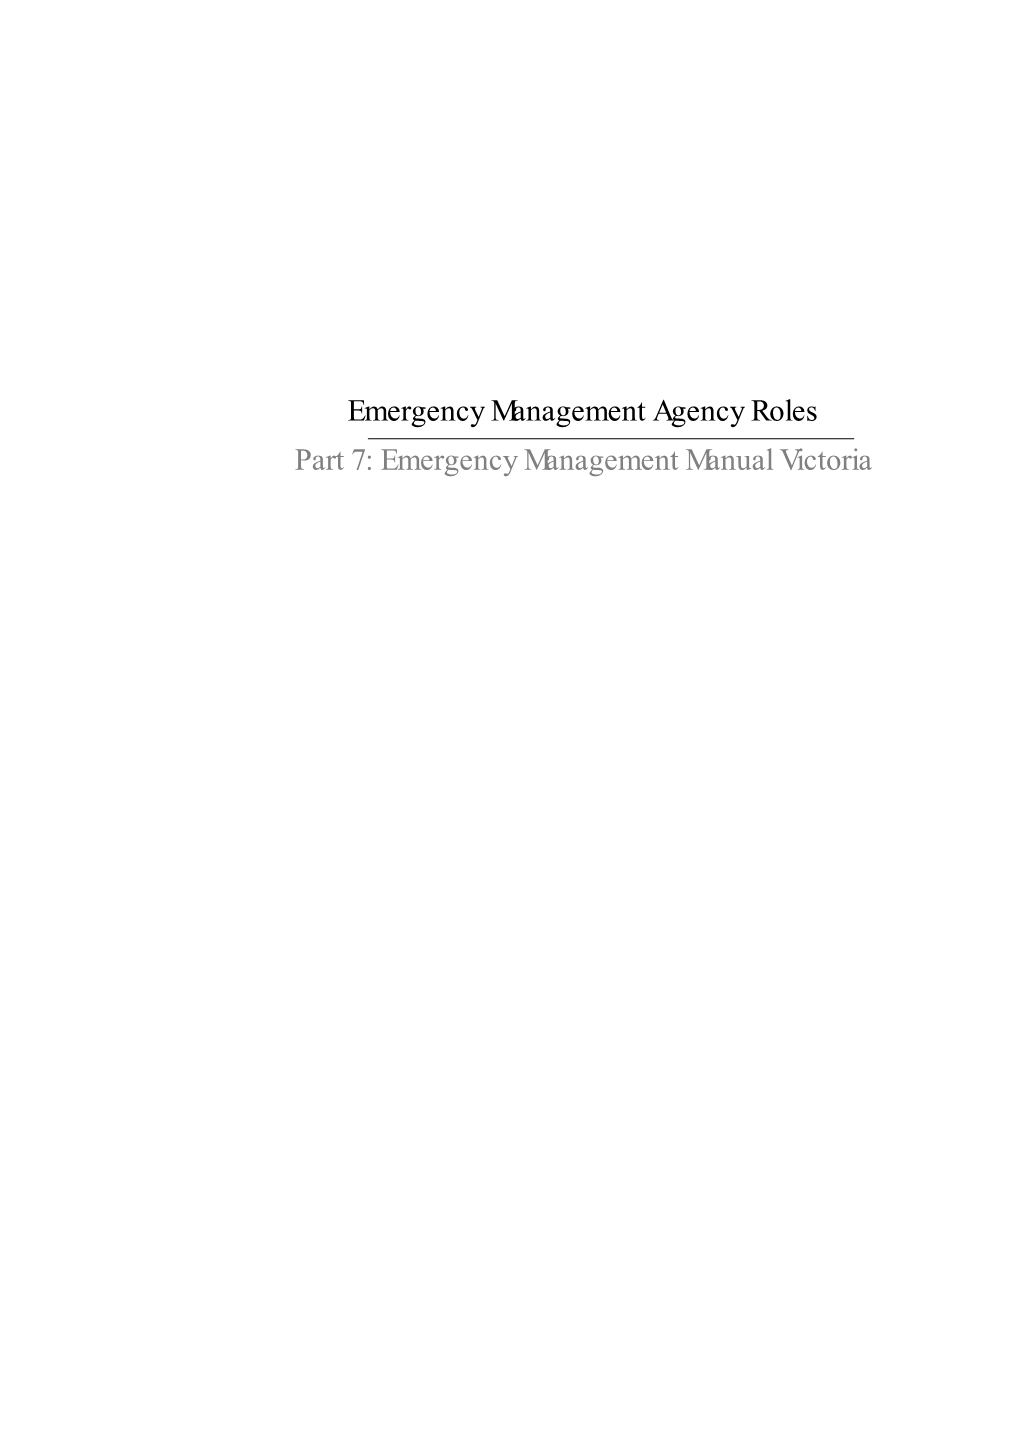 Emergency Management Agency Roles Part 7: Emergency Management Manual Victoria